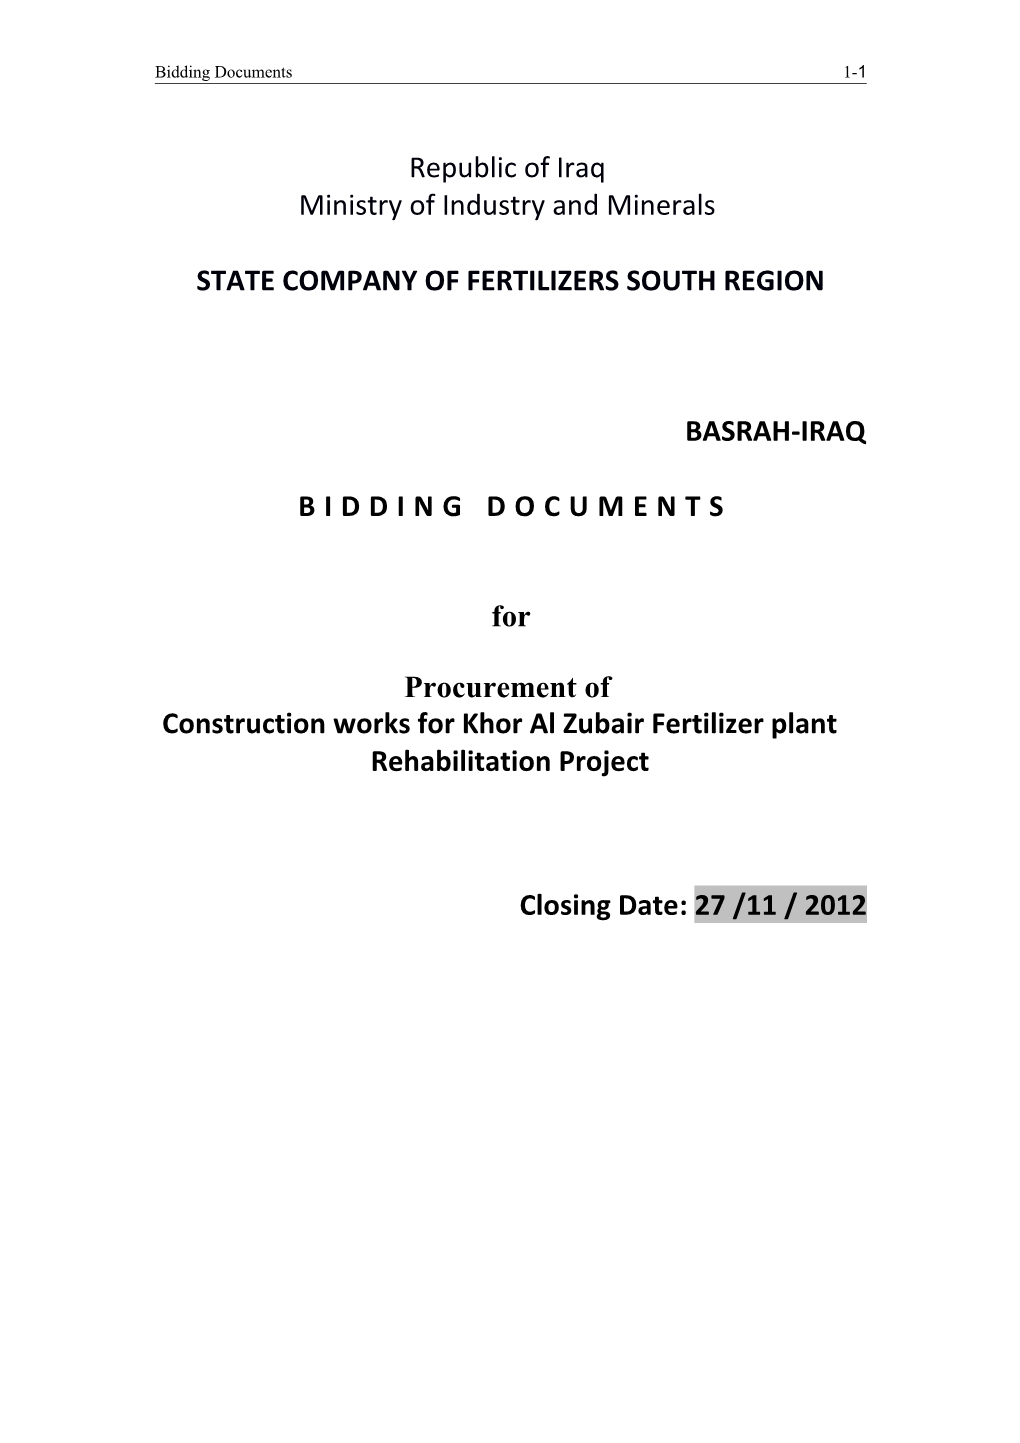 State Company of Fertilizers South Region